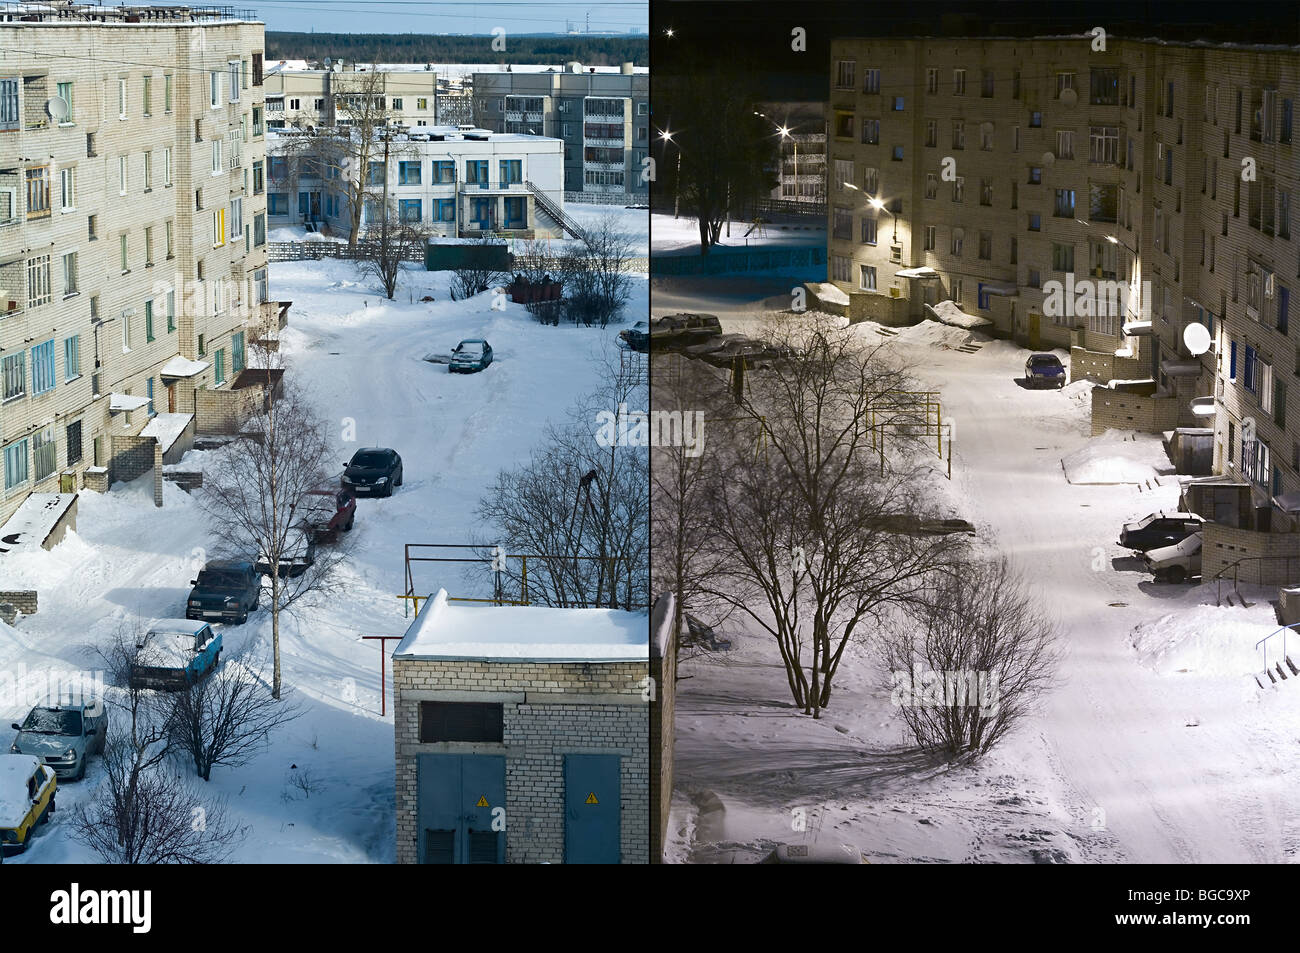 Day and night on one picture divided by line. Day on one side, night on another. Cityscape on image. Winter time Stock Photo